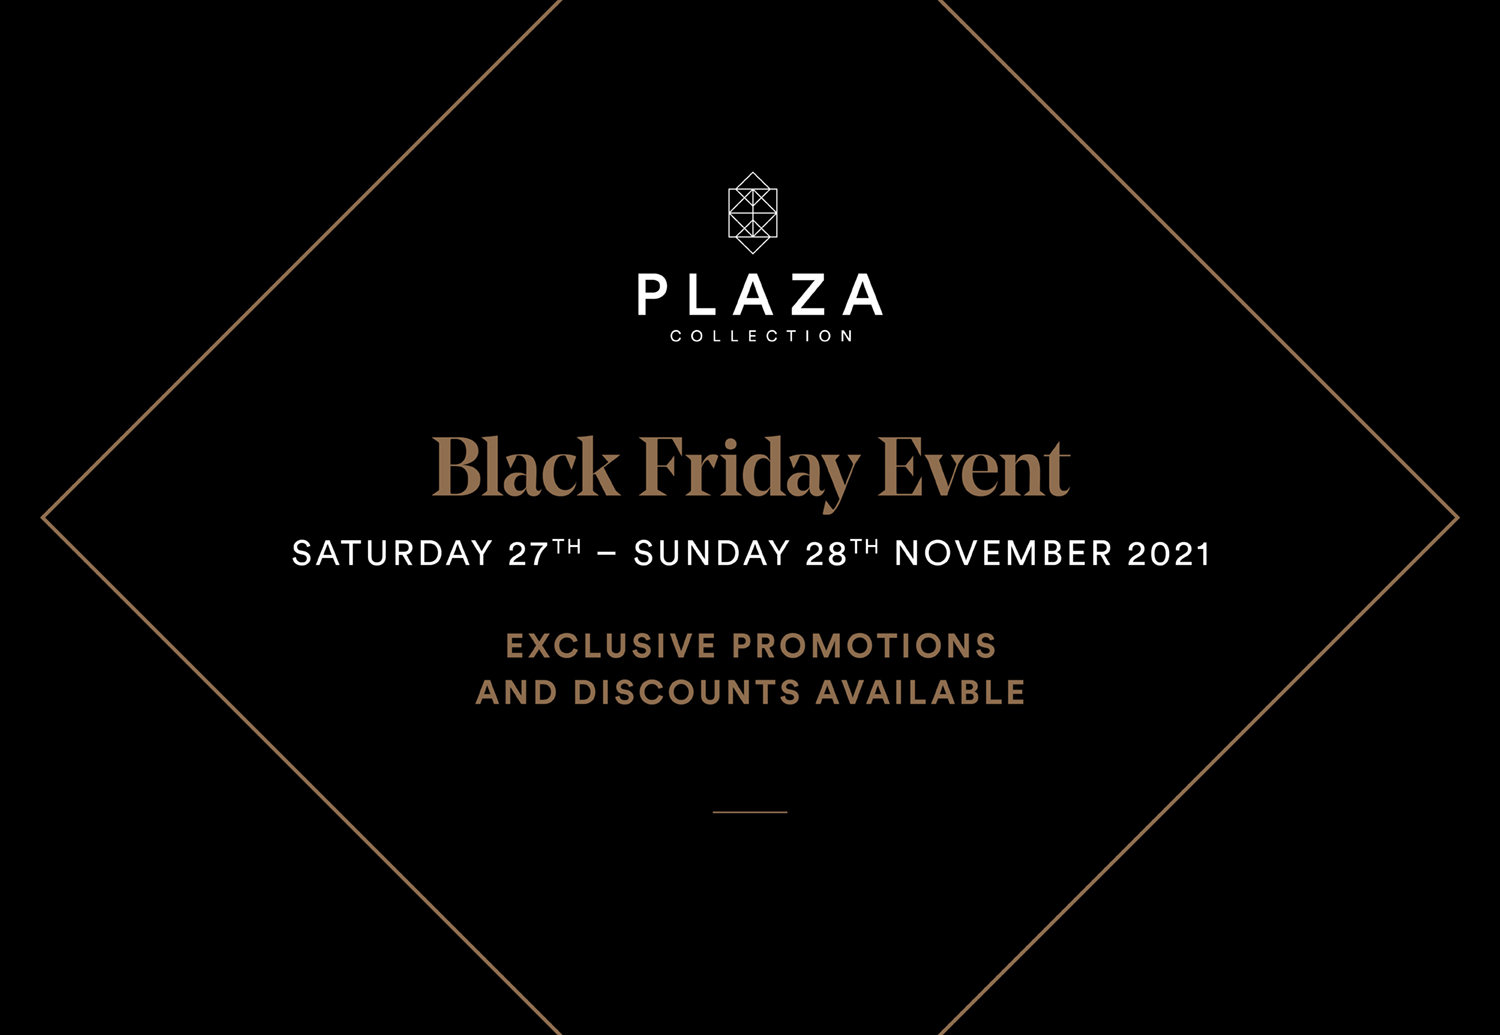 An Exclusive Black Friday bonanza at Plaza Collection in Mill Hill